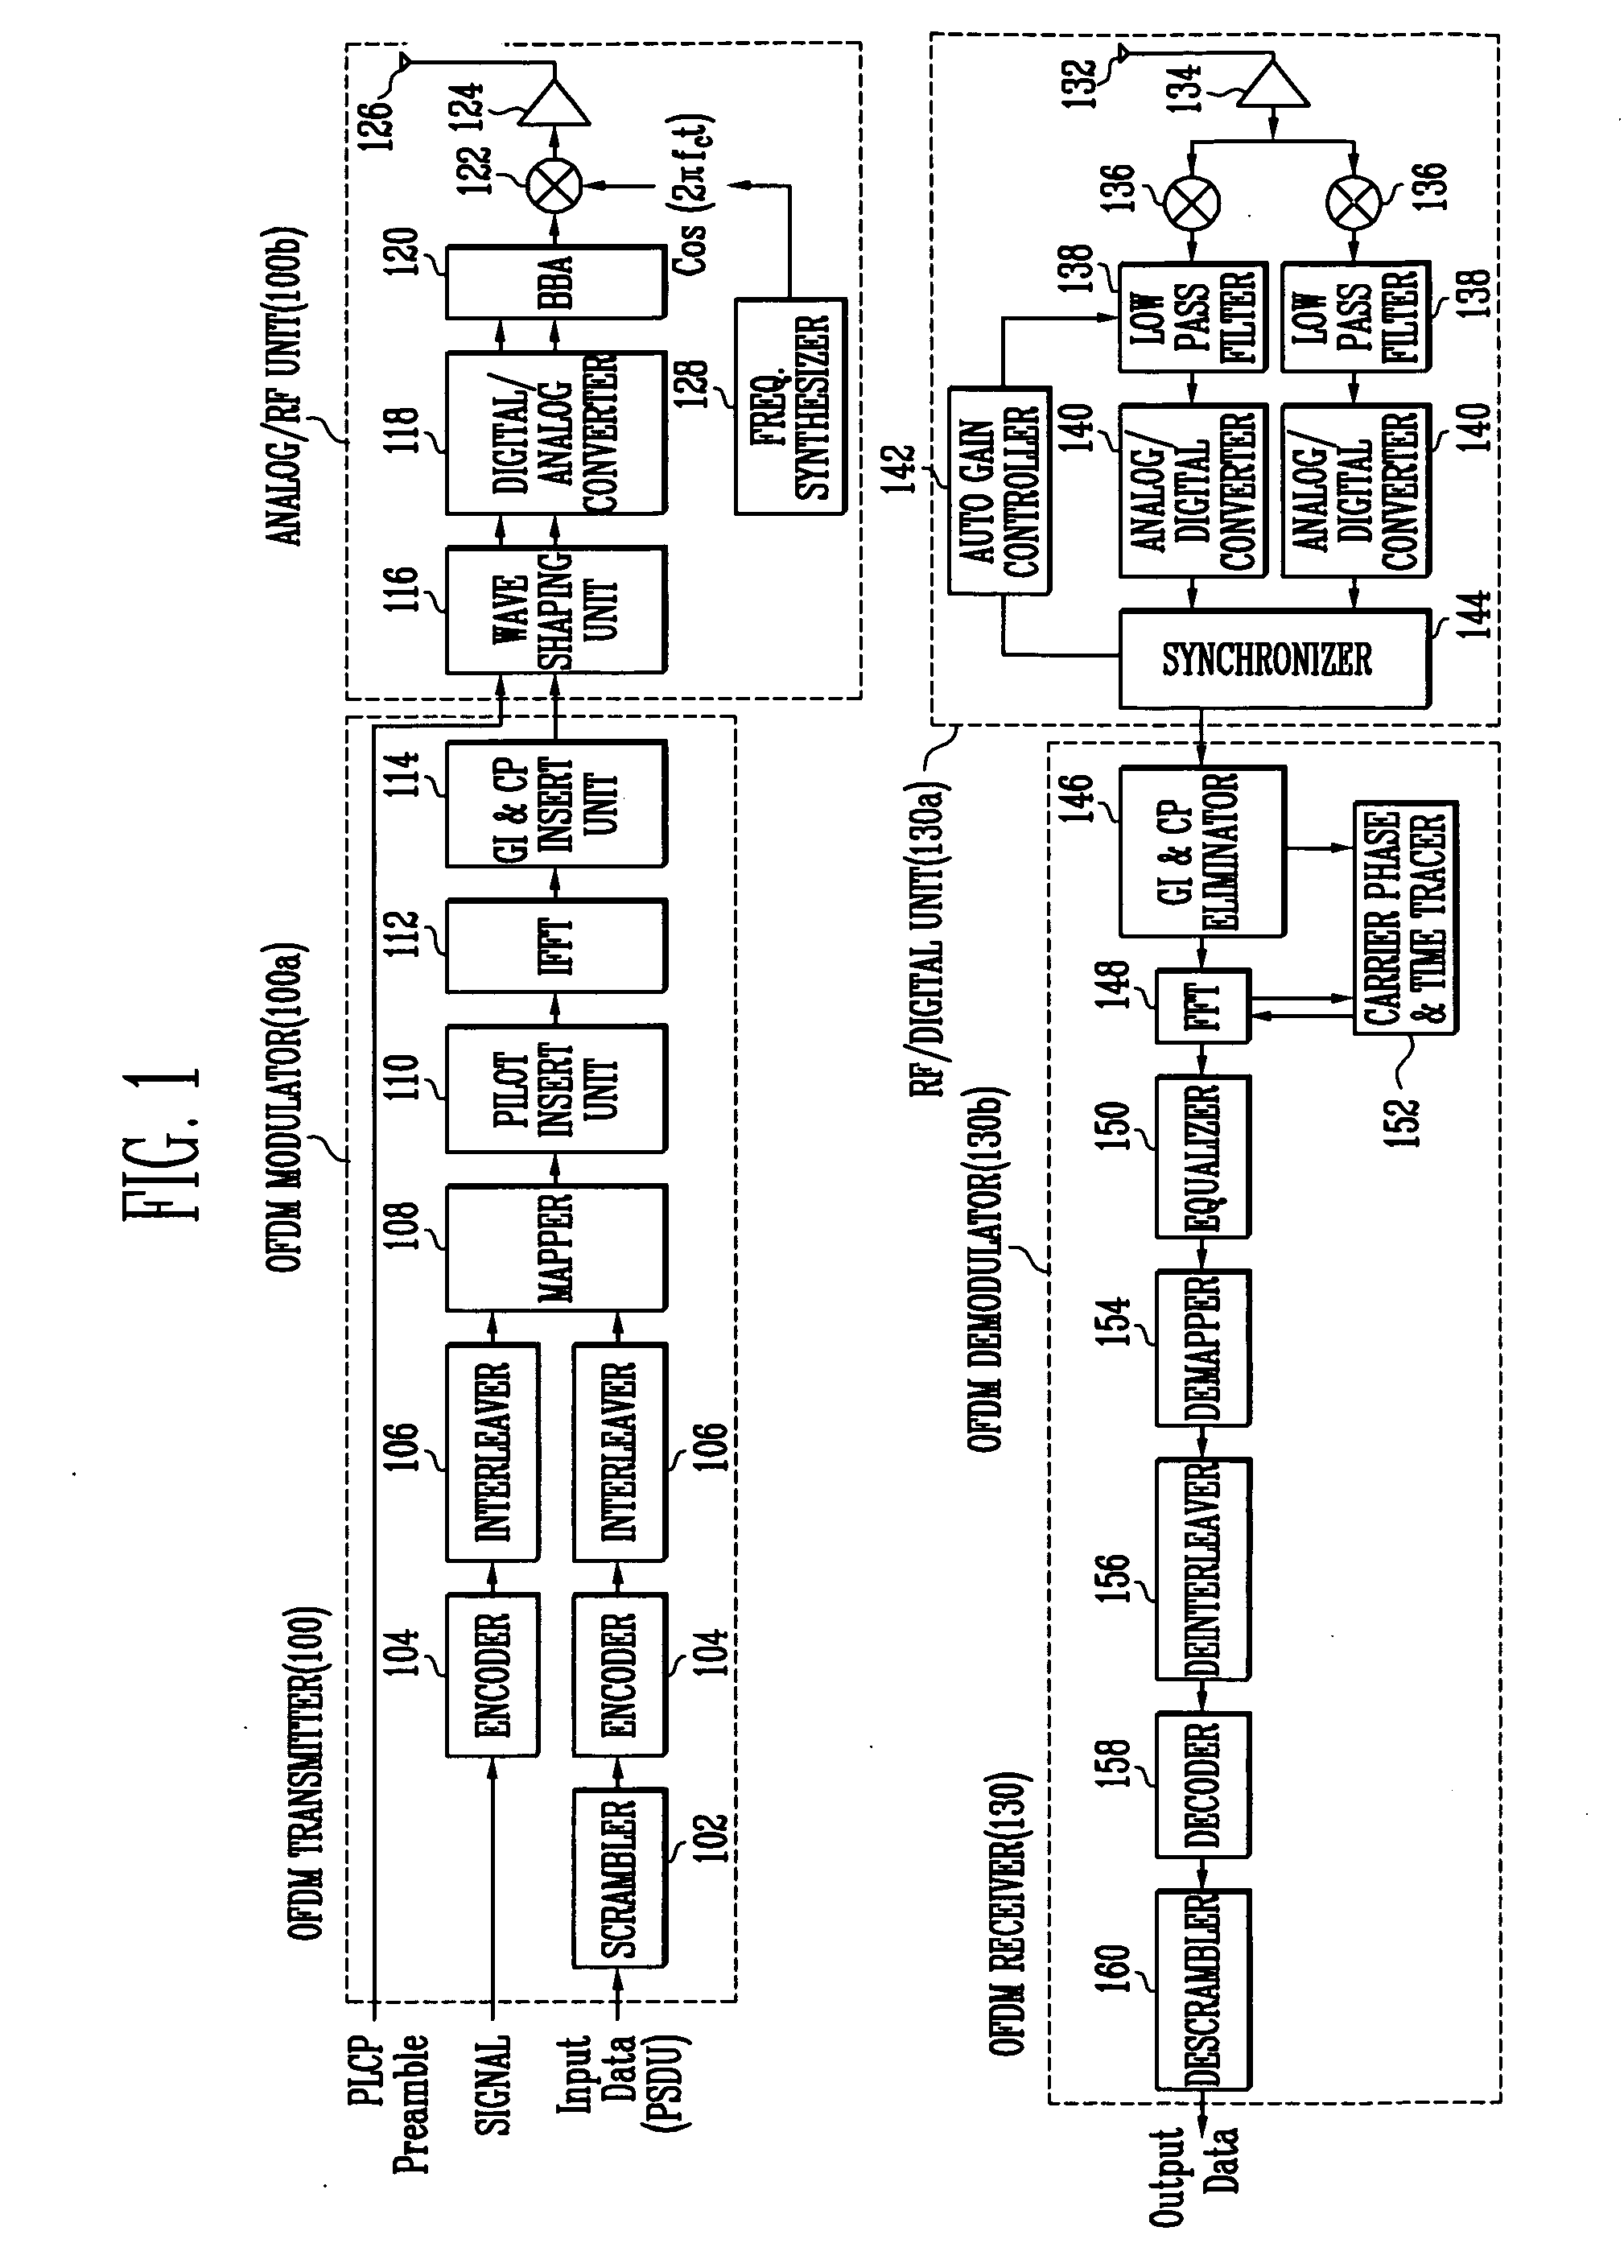 Method and apparatus for transmitting data based on OFDM